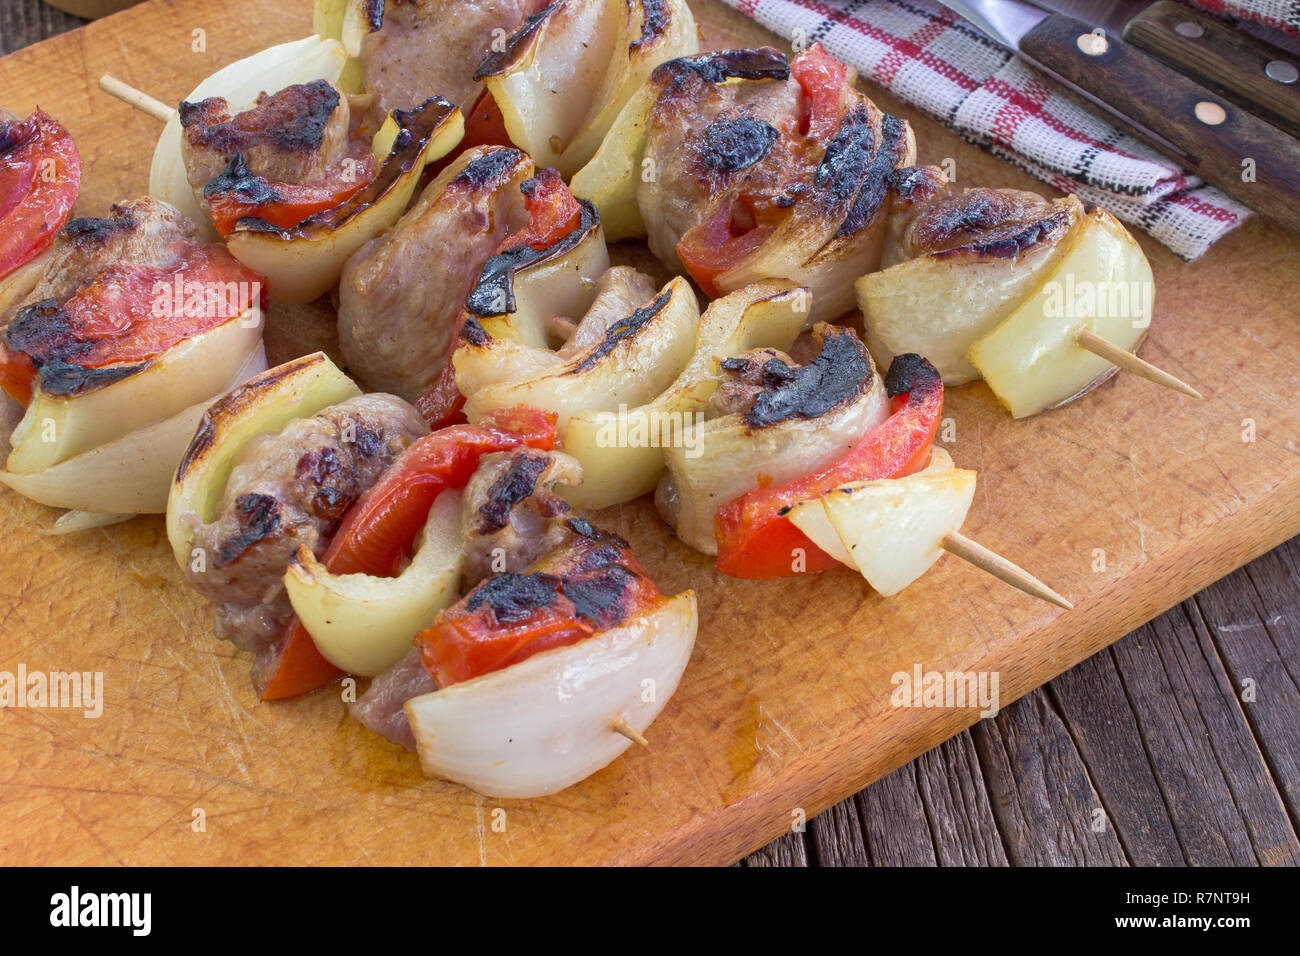 Grilled meat with vegetables on cutting board Stock Photo